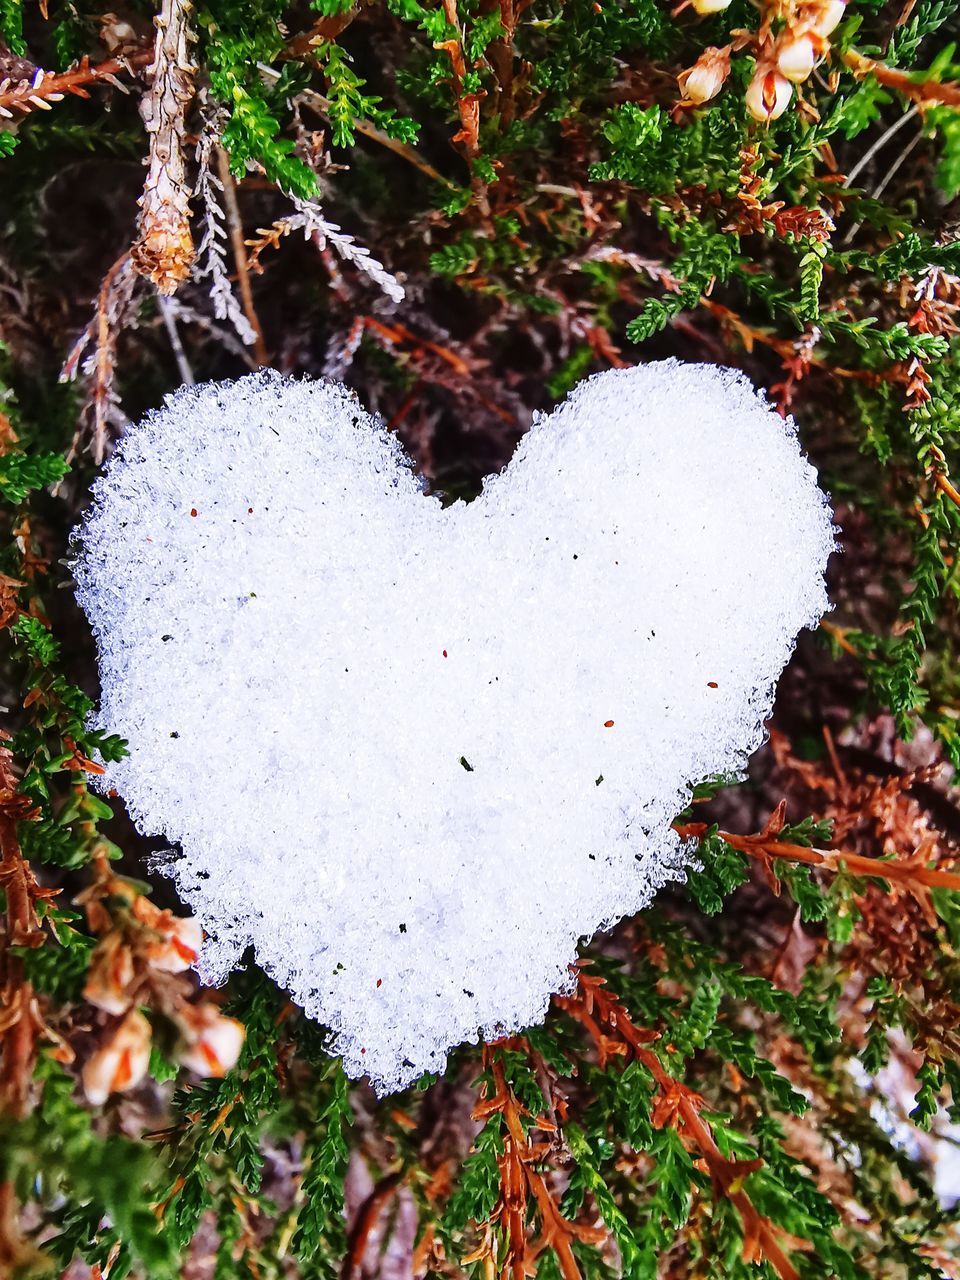 CLOSE-UP OF HEART SHAPE ON SNOW COVERED LAND